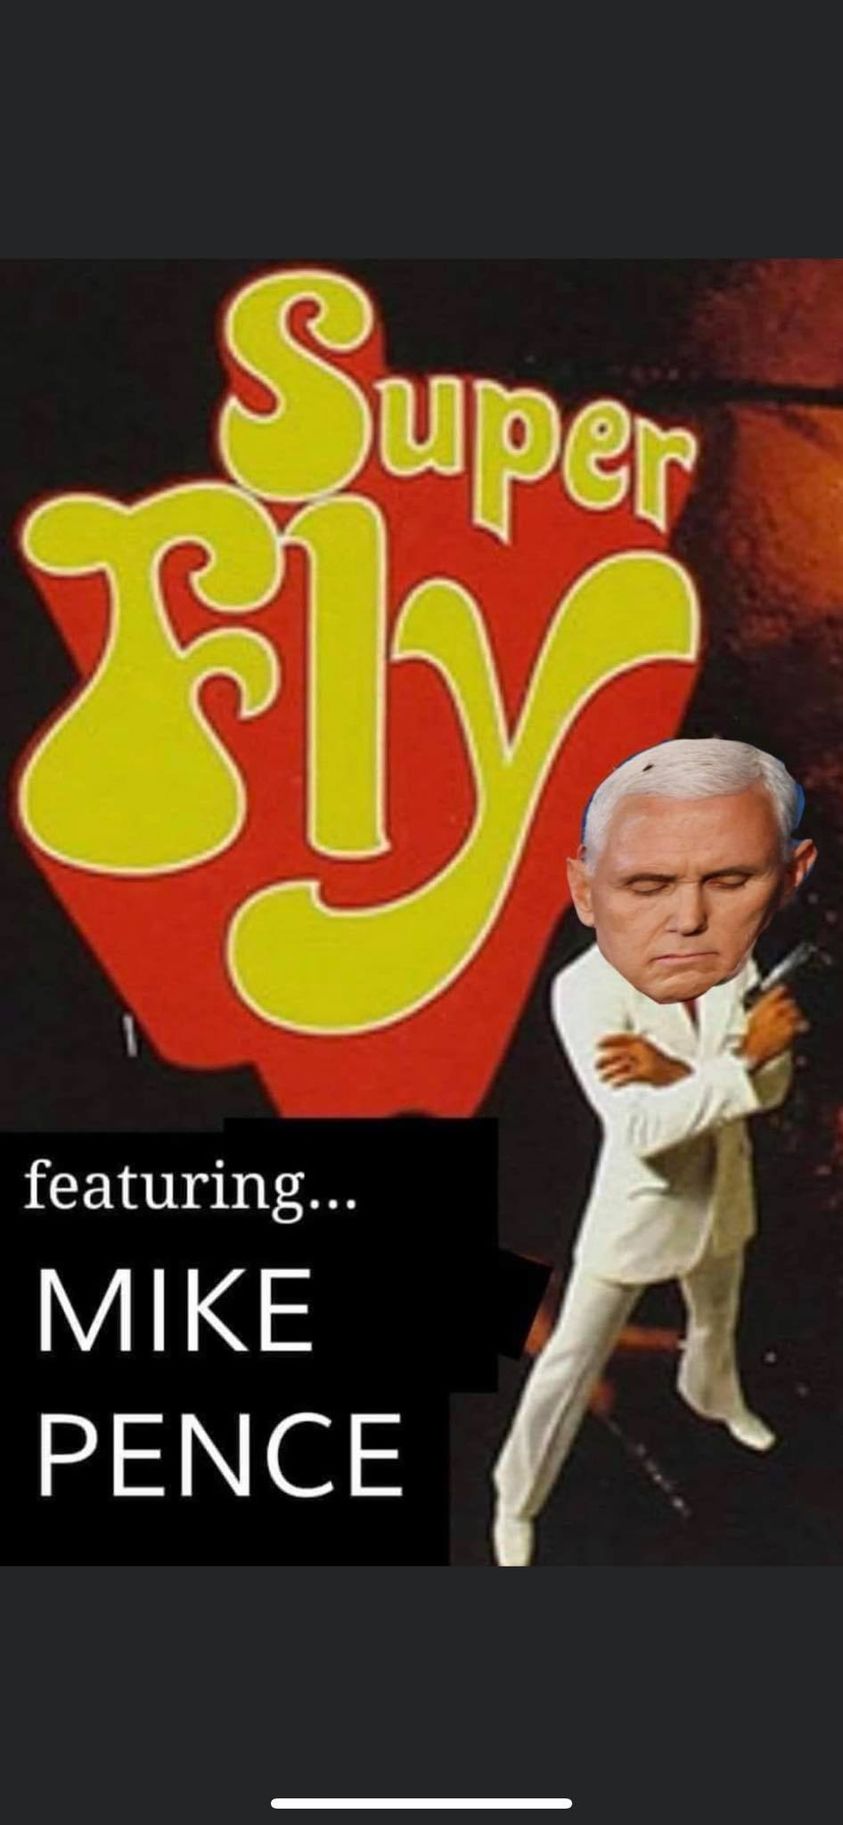 funny pic - super fly curtis mayfield - Super fly featuring... Mike Pence